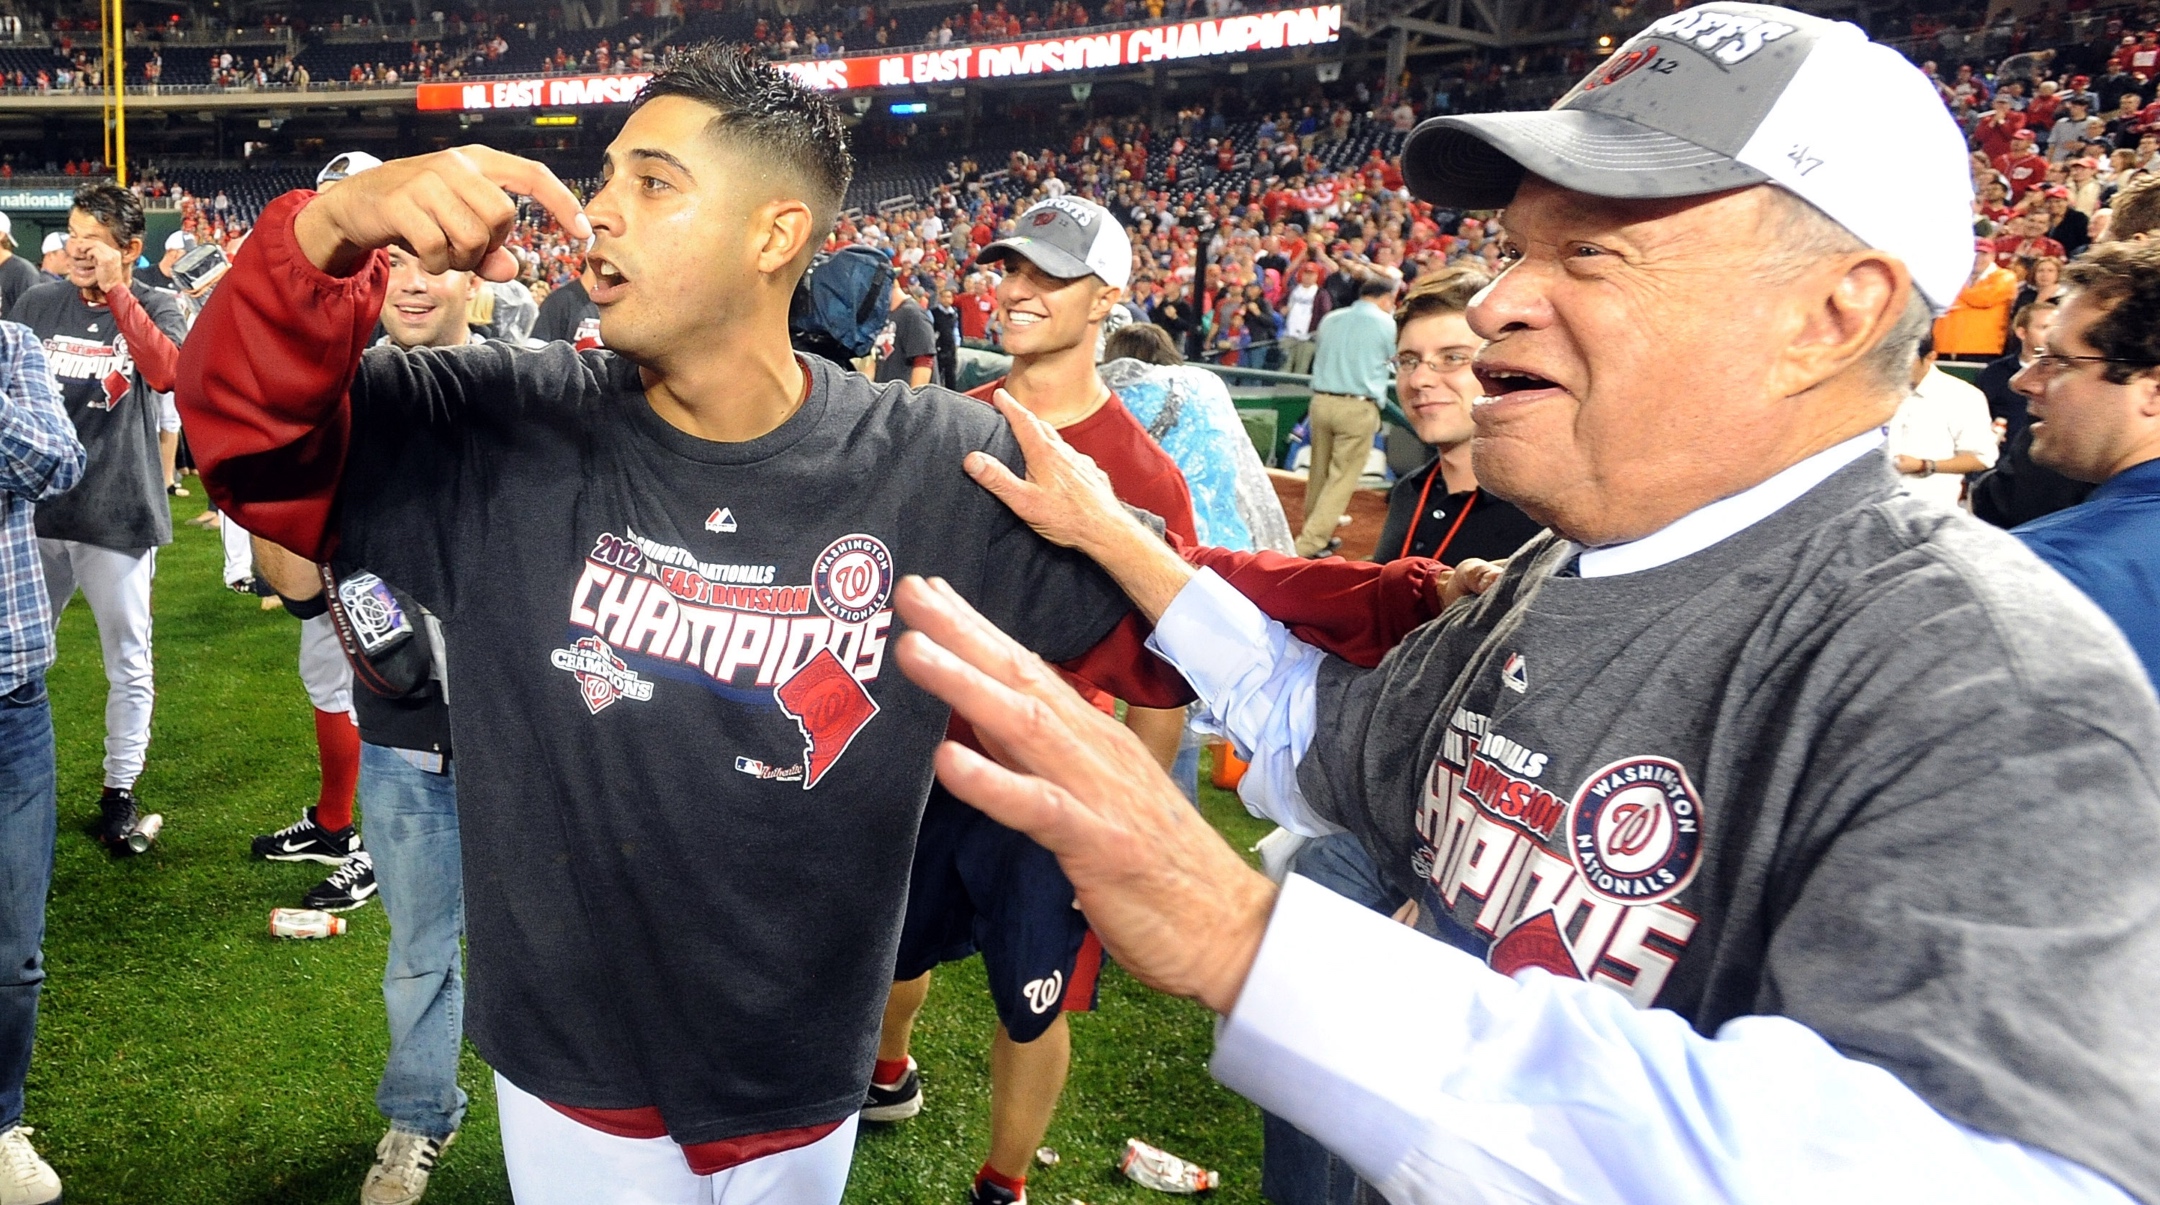 Gio Gonzalez #47 of the Washington Nationals celebrates with owner Ted Lerner after winning the National League East Division Championship after the game against the Philadelphia Phillies at Nationals Park, Oct. 1, 2012 (G Fiume/Getty Images)